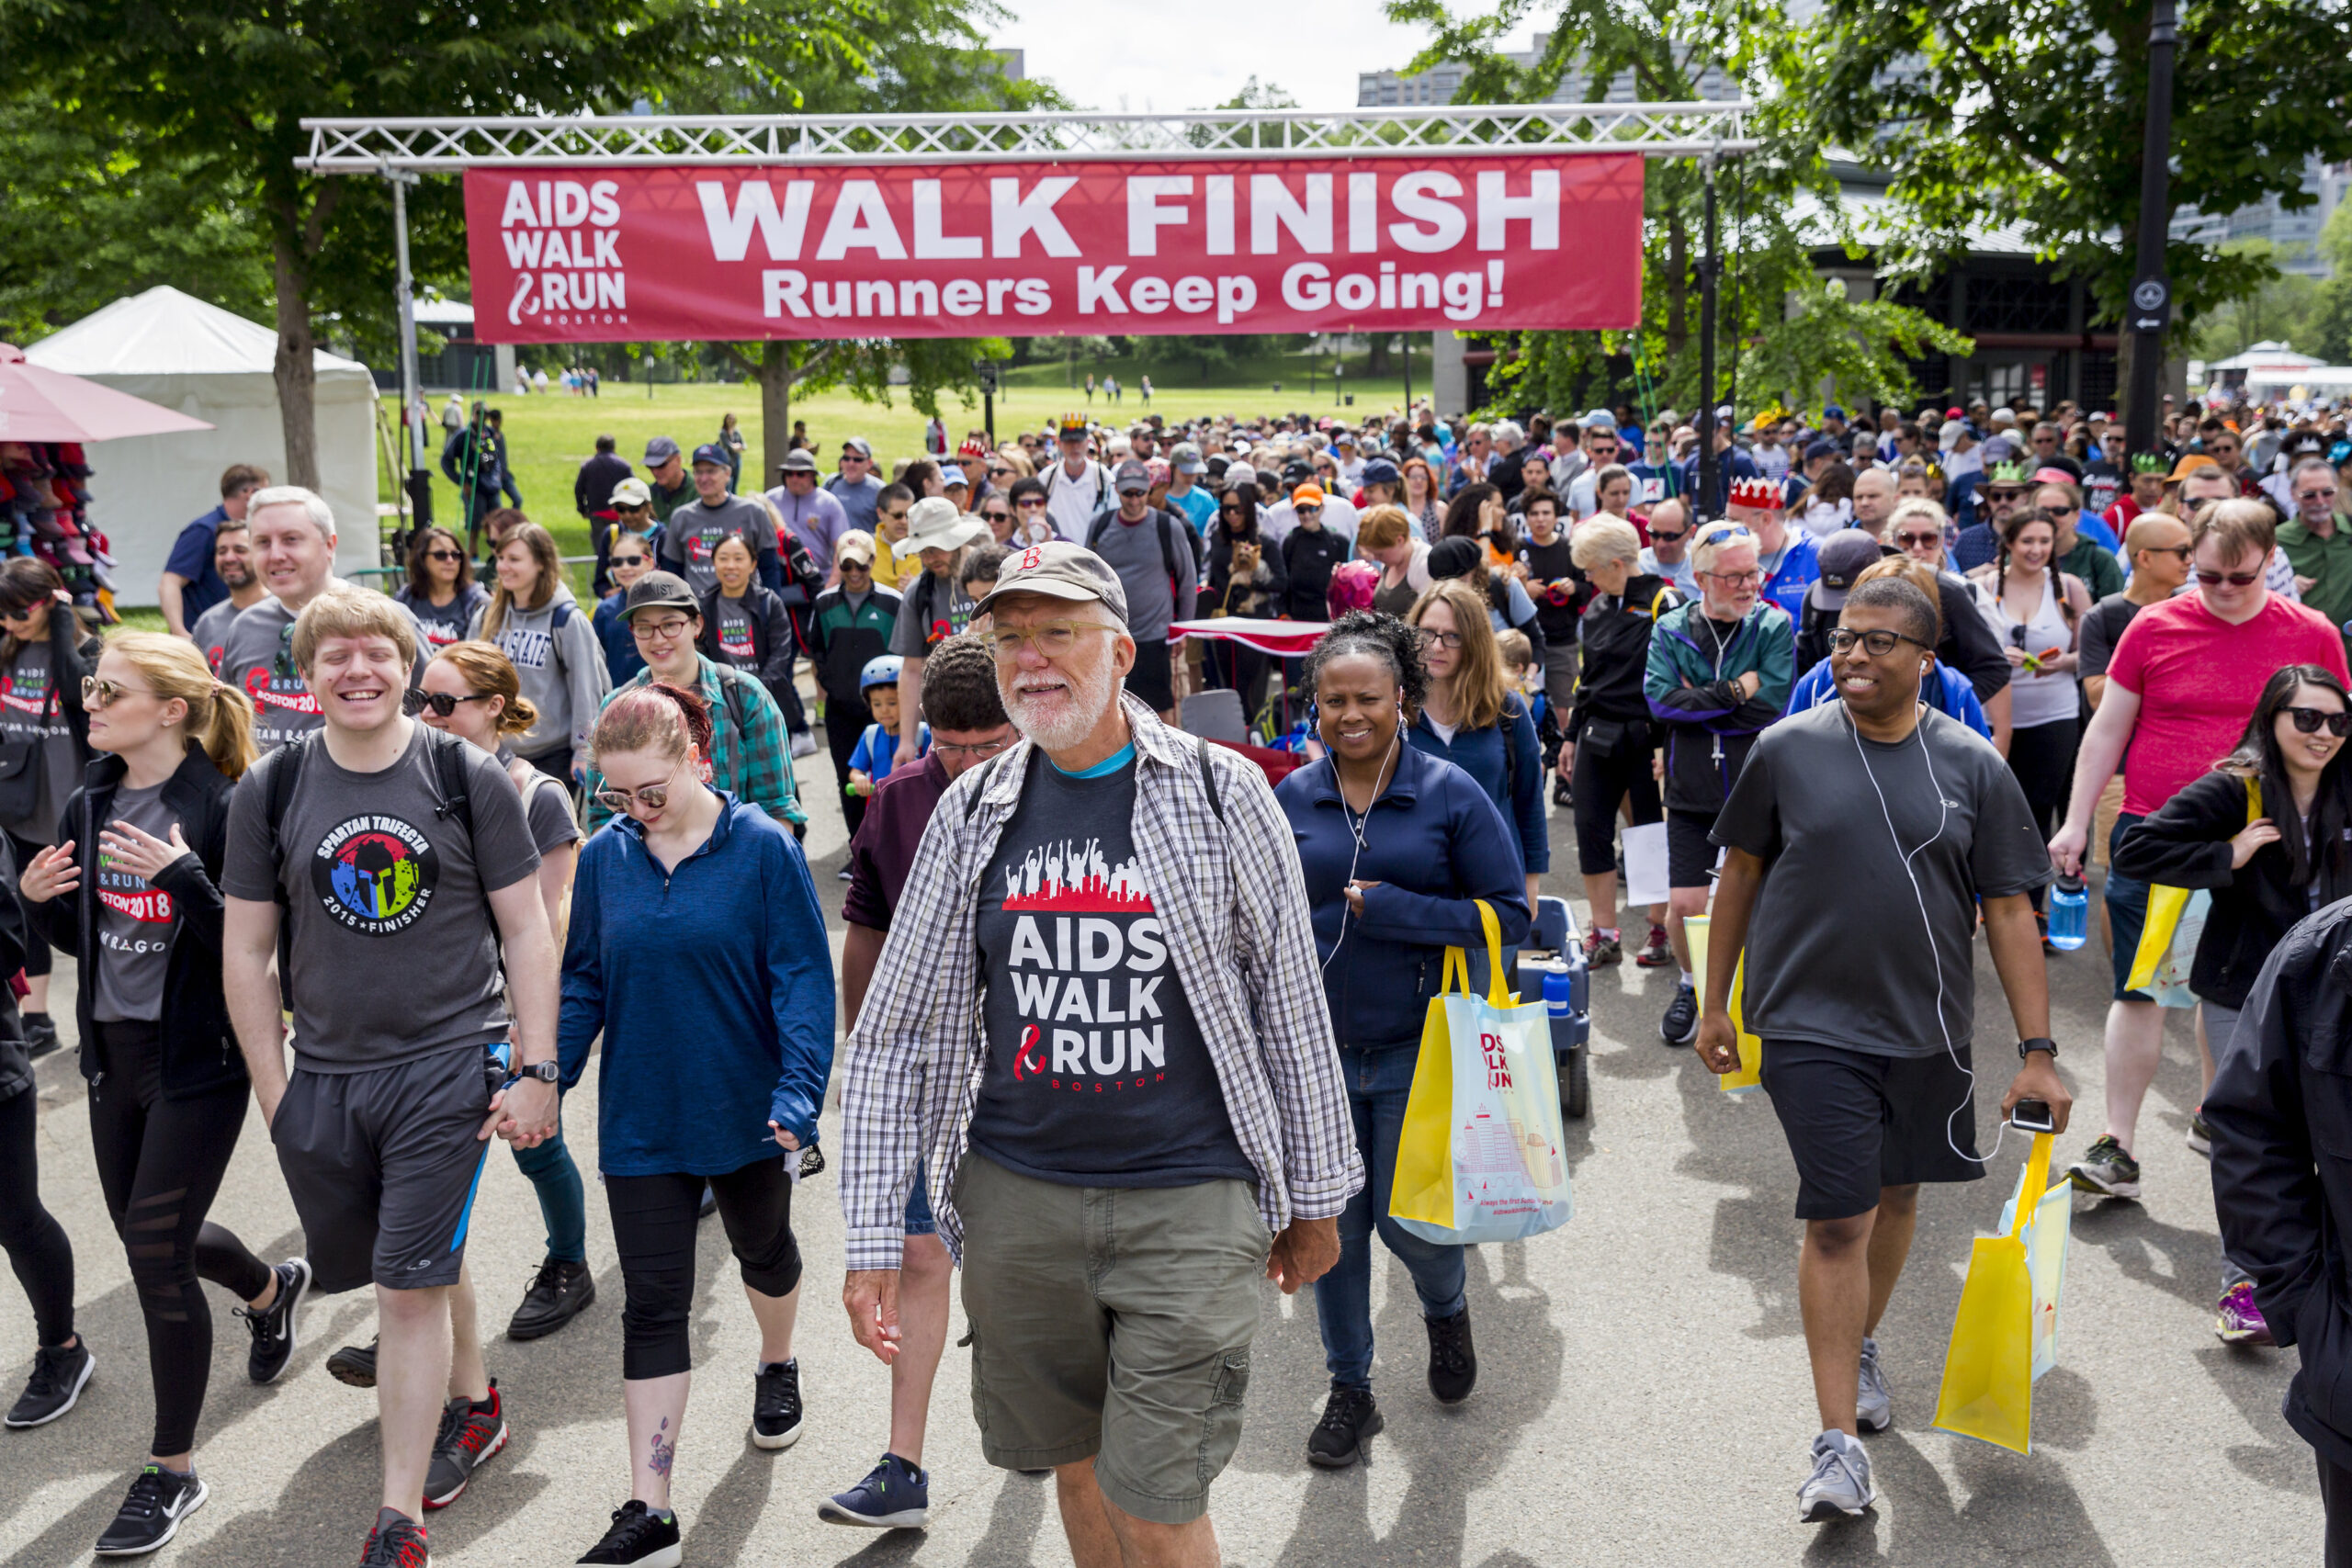 June 3, 2018 -- The 2018 AIDS Walk, hosted by the AIDS Action Committee. Photo by Caitlin Cunningham (www.caitlincunningham.com).